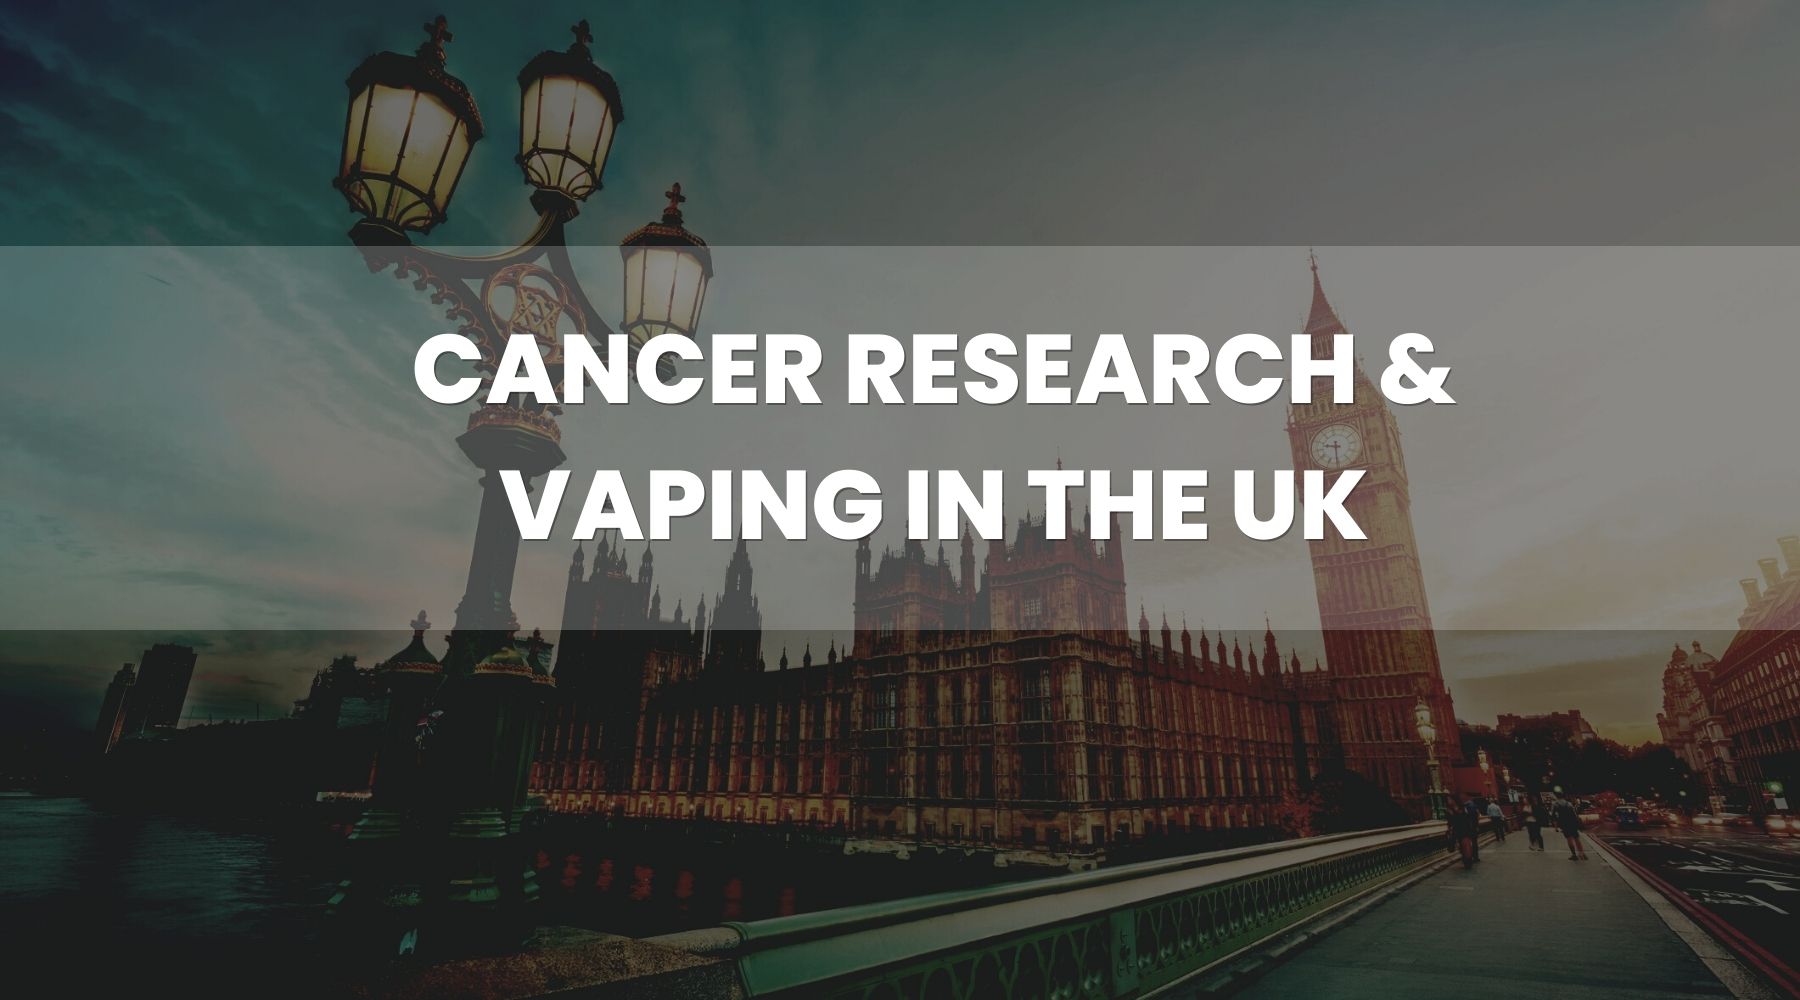 Cancer Research & Vaping in the UK